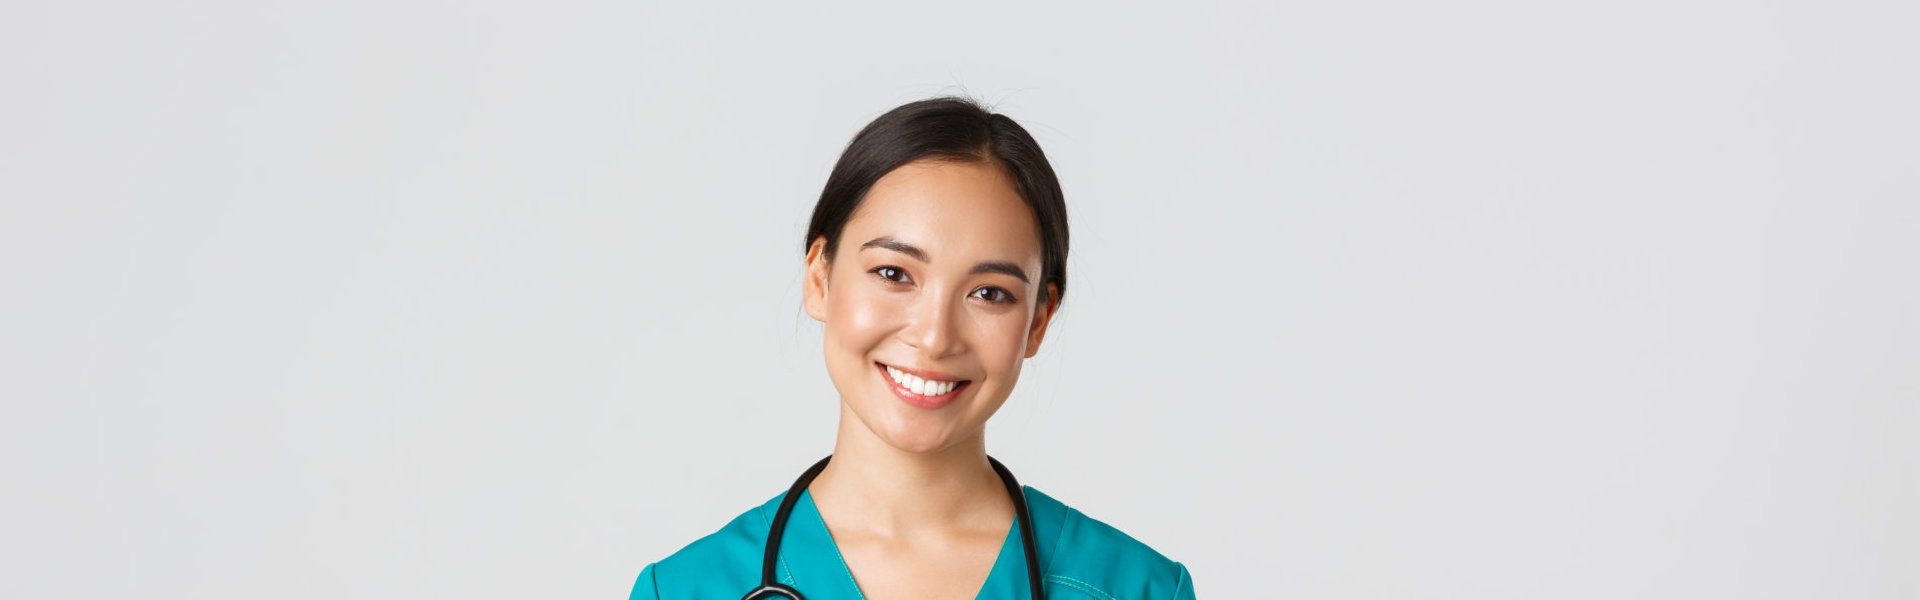 Beautiful nurse with a stethoscope on her neck smiling